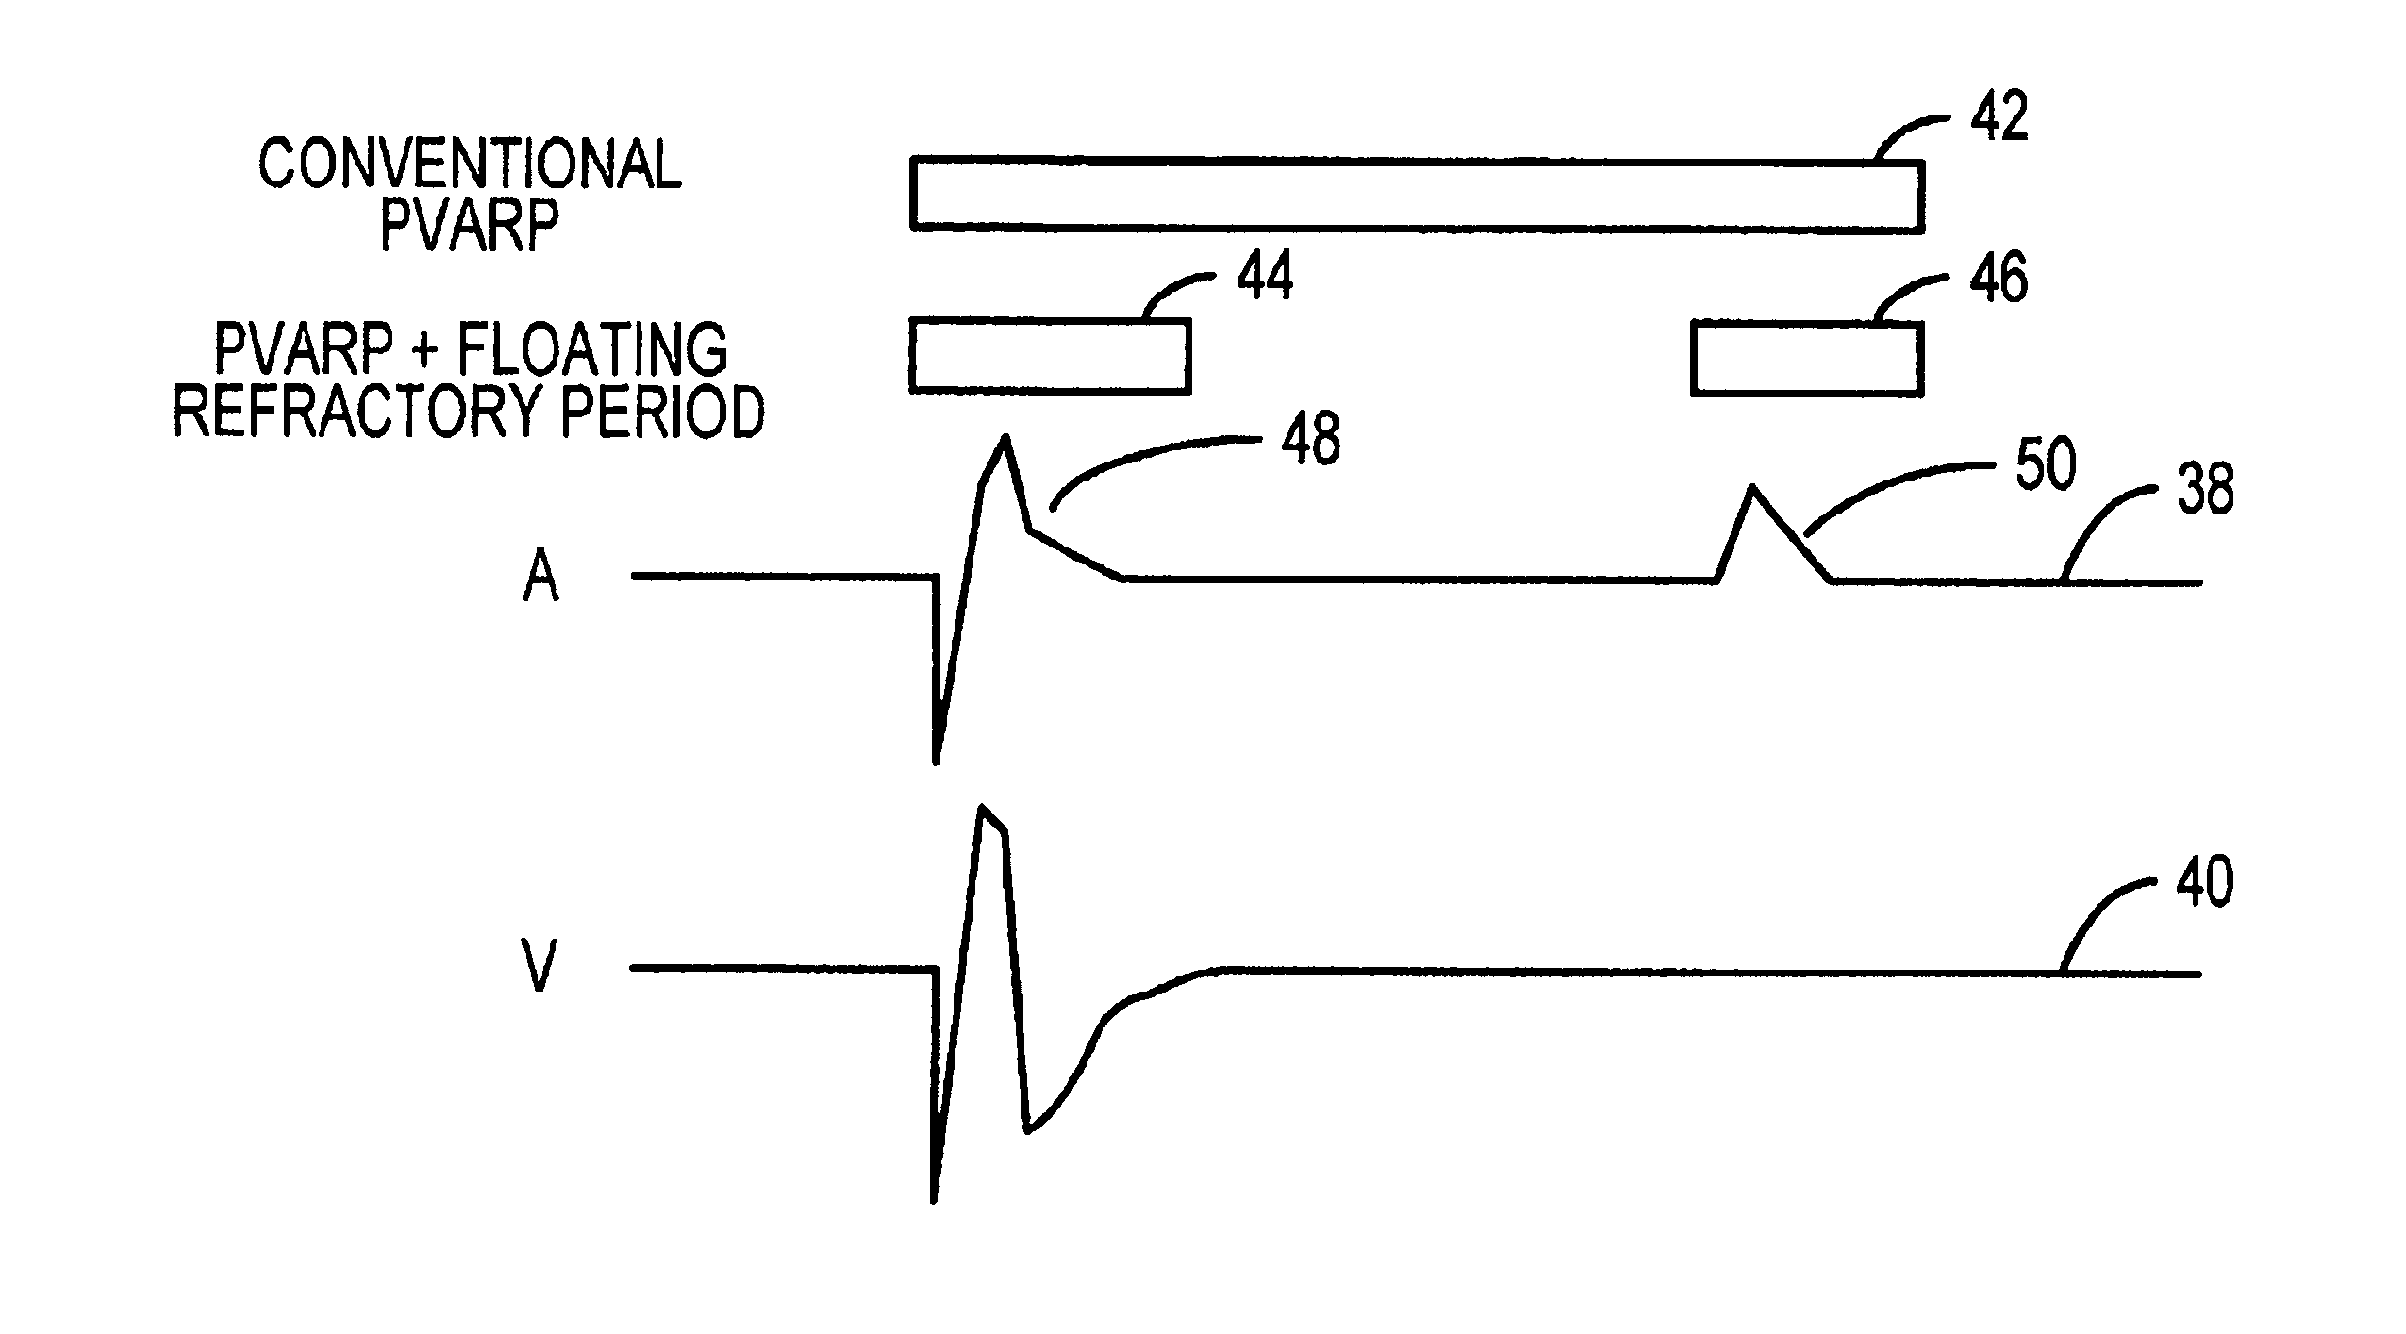 Method and apparatus for avoiding unwanted sensing in a cardiac rhythm management device